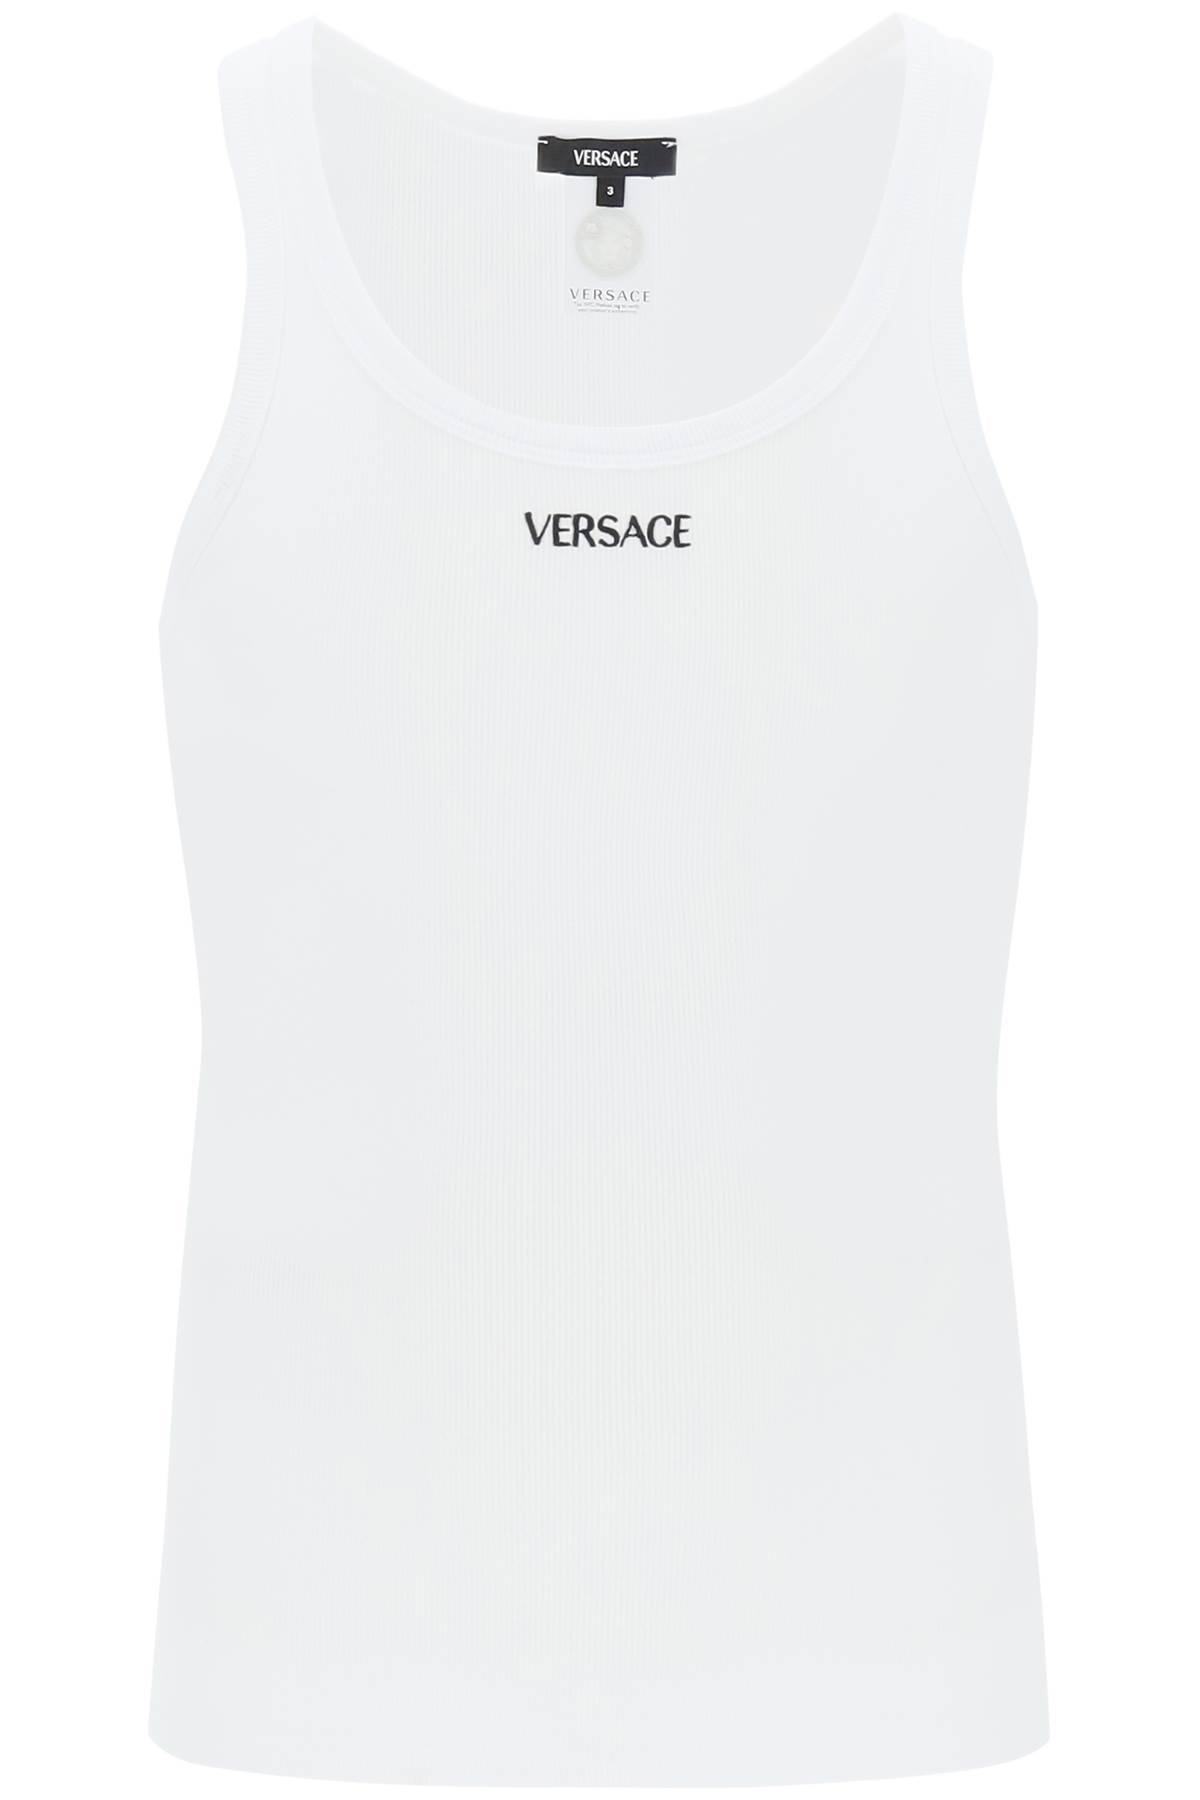 Versace VERSACE "intimate tank top with embroidered